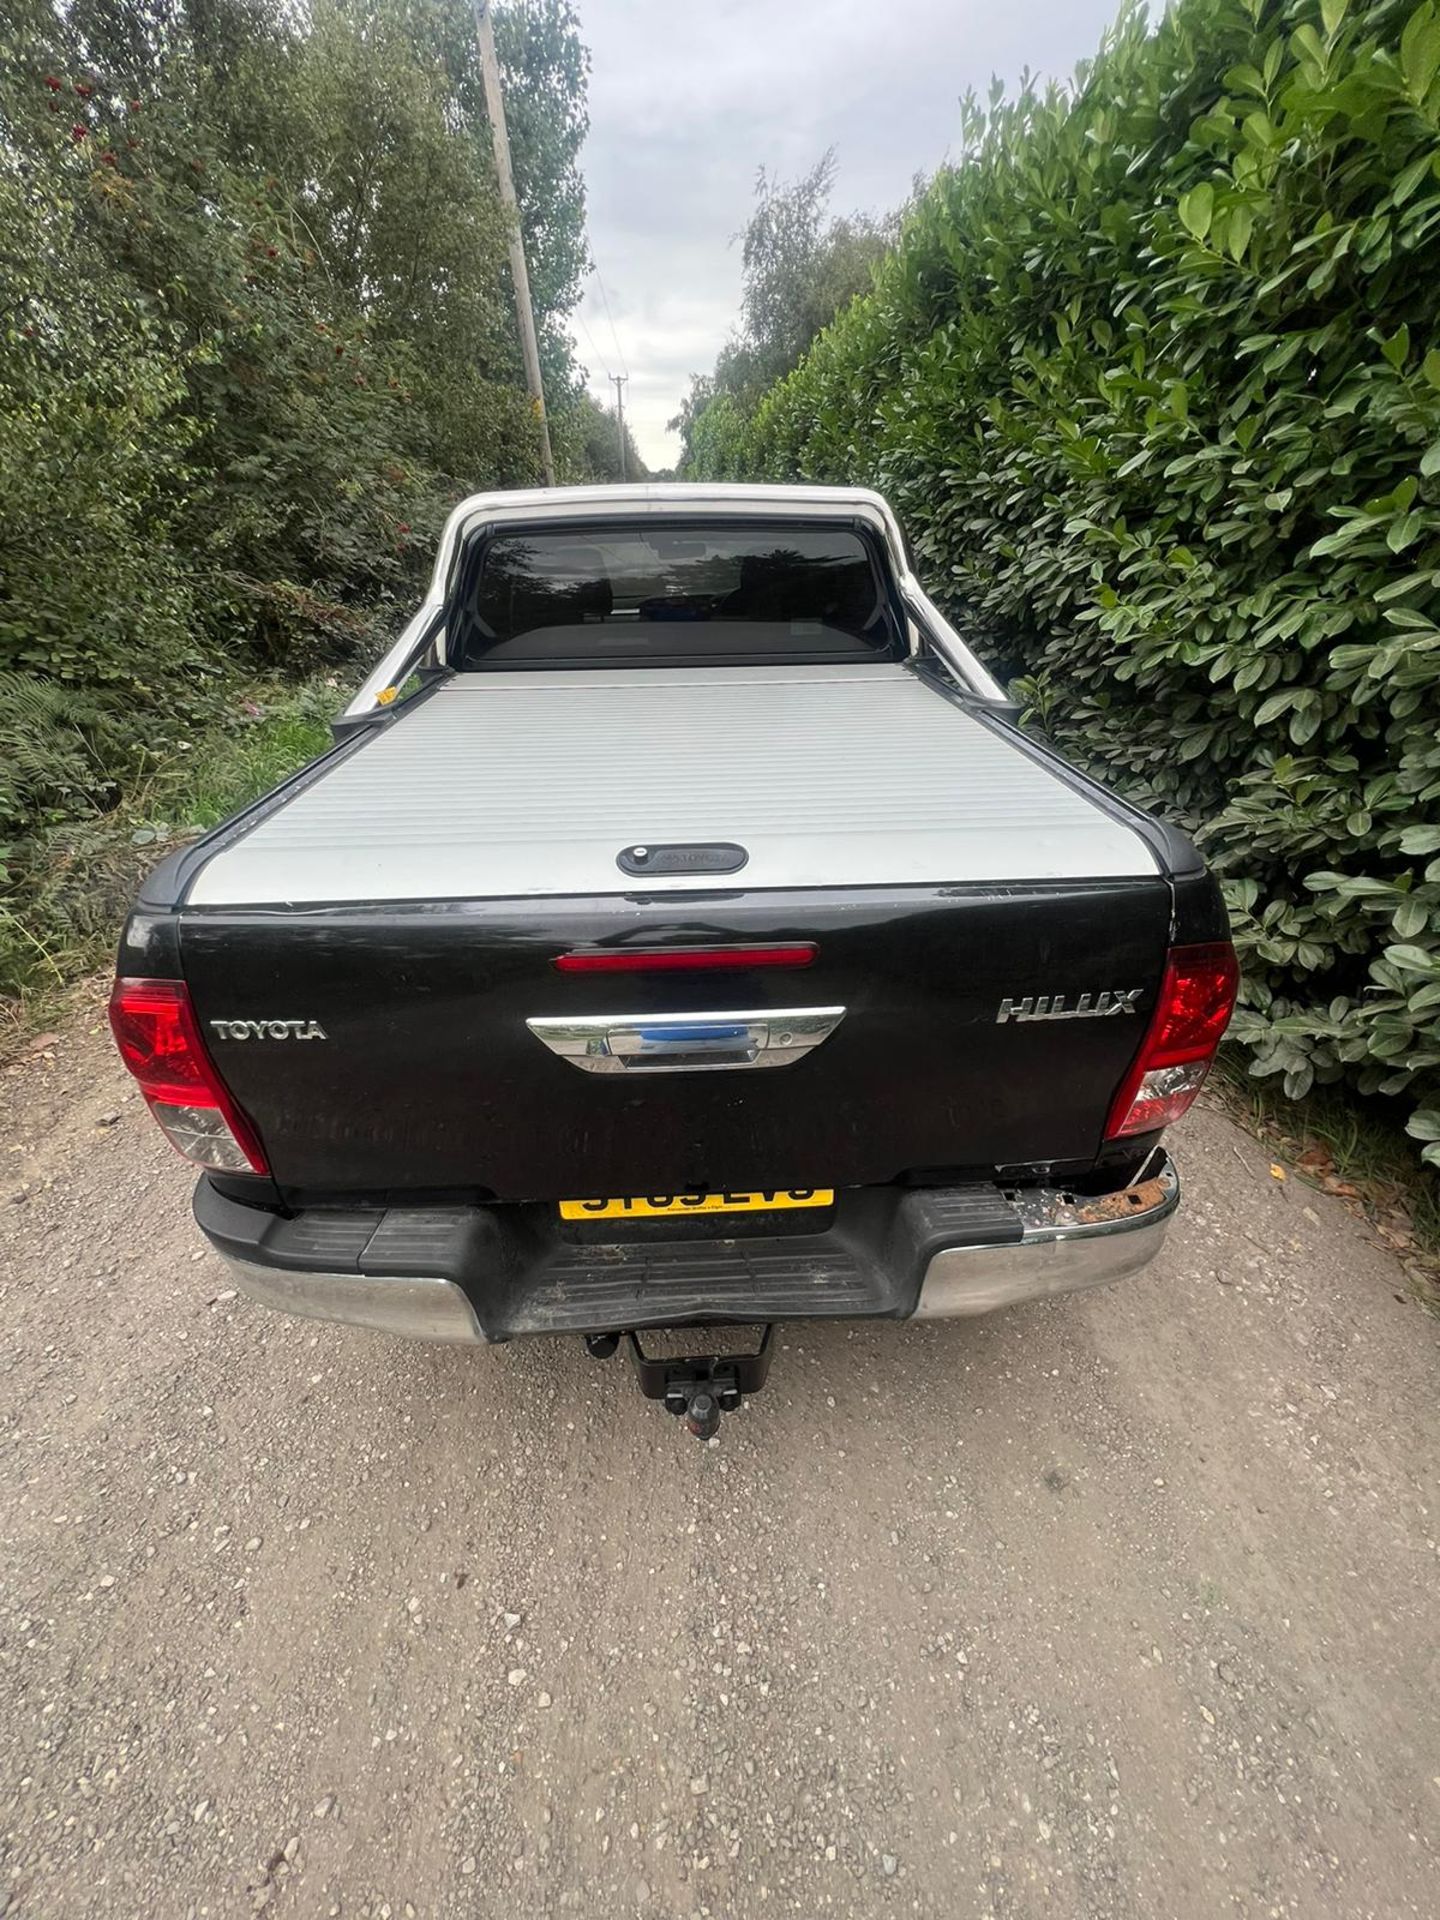 TOYOTA HILUX INVISIBLE 2019 FULL V5 - Image 8 of 15